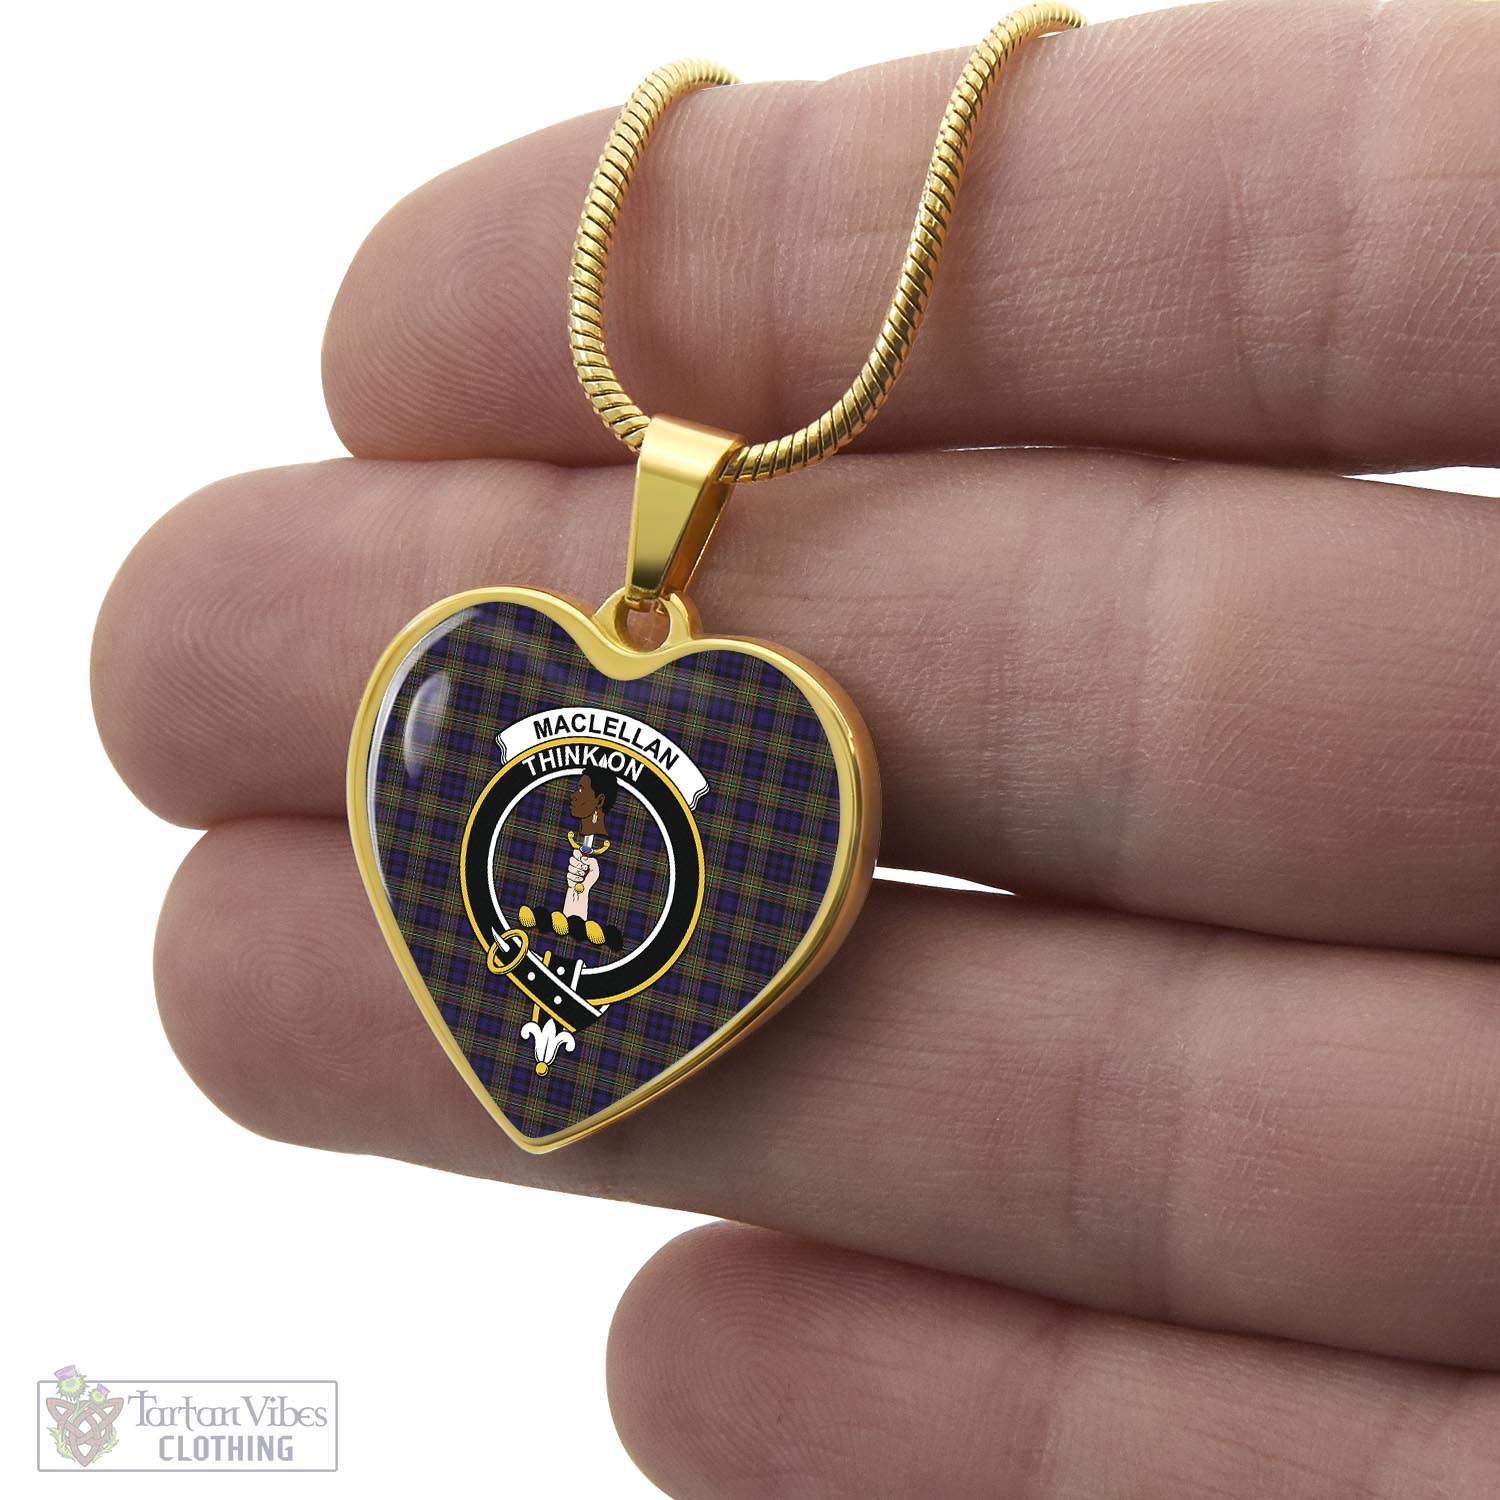 Tartan Vibes Clothing MacLellan Tartan Heart Necklace with Family Crest